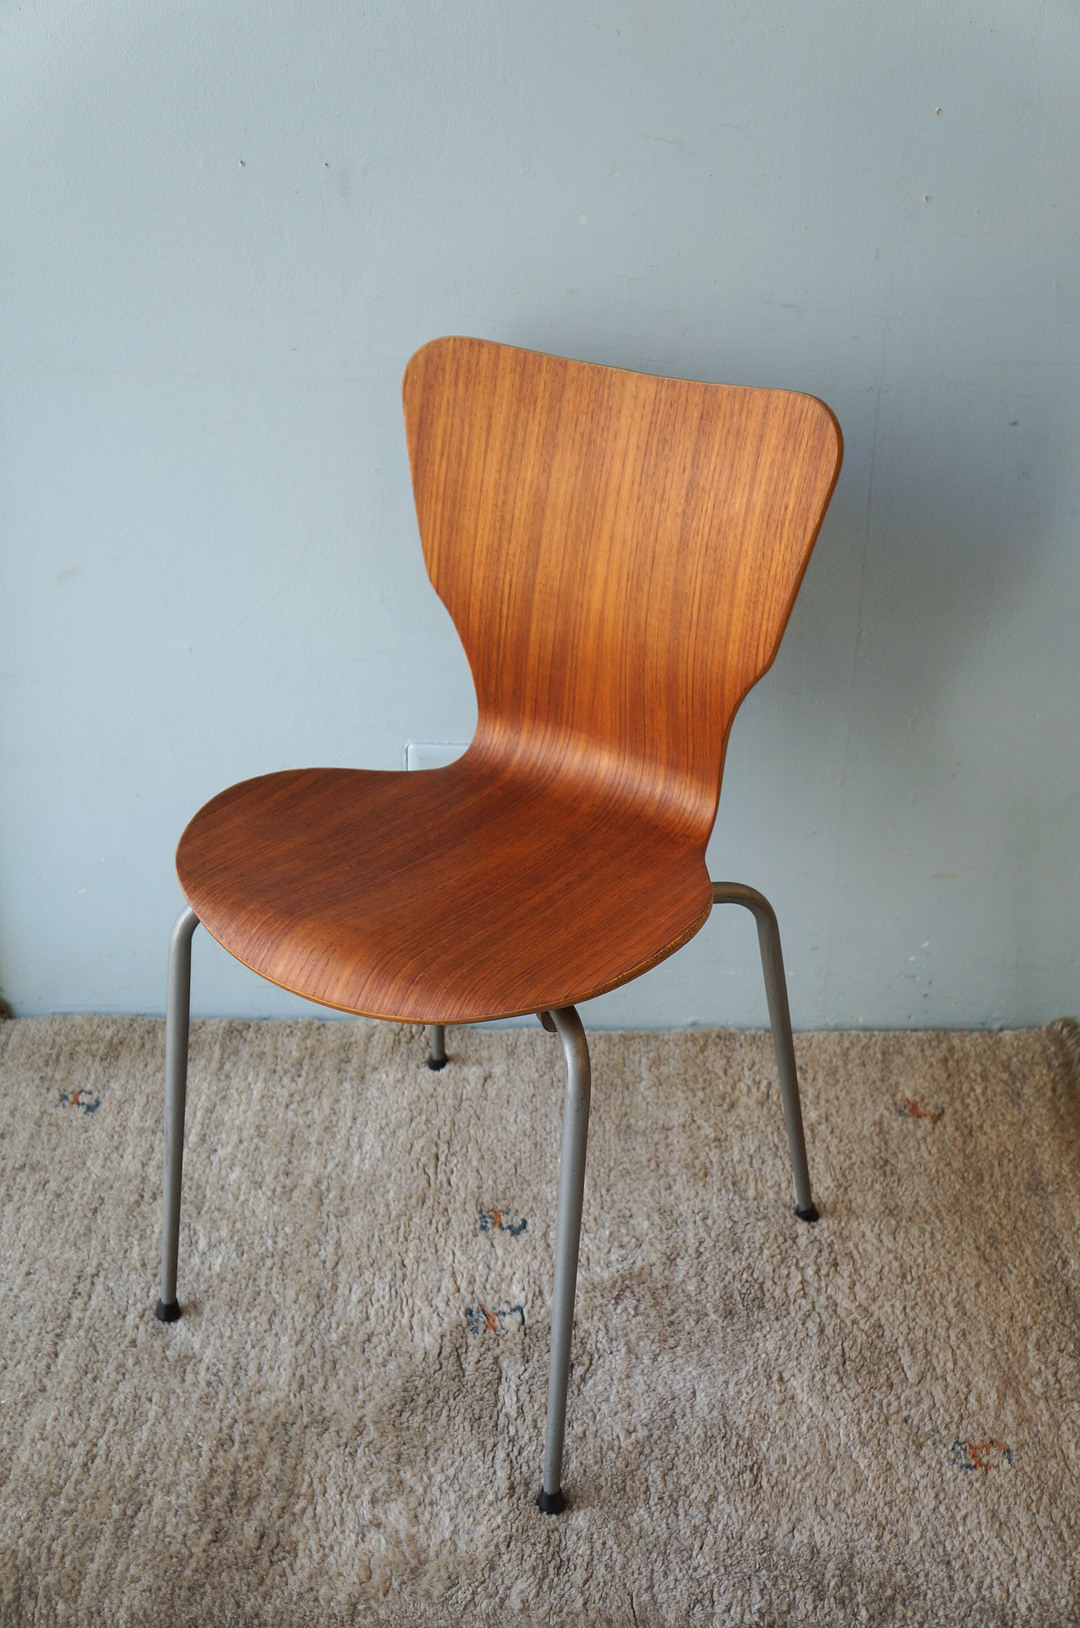 Danish Vintage Teak Plywood Stacking Chair MH Stålmøbler/デンマークヴィンテージ スタッキングチェア チーク材 プライウッド 椅子 ミッドセンチュリー モダン 北欧家具 8